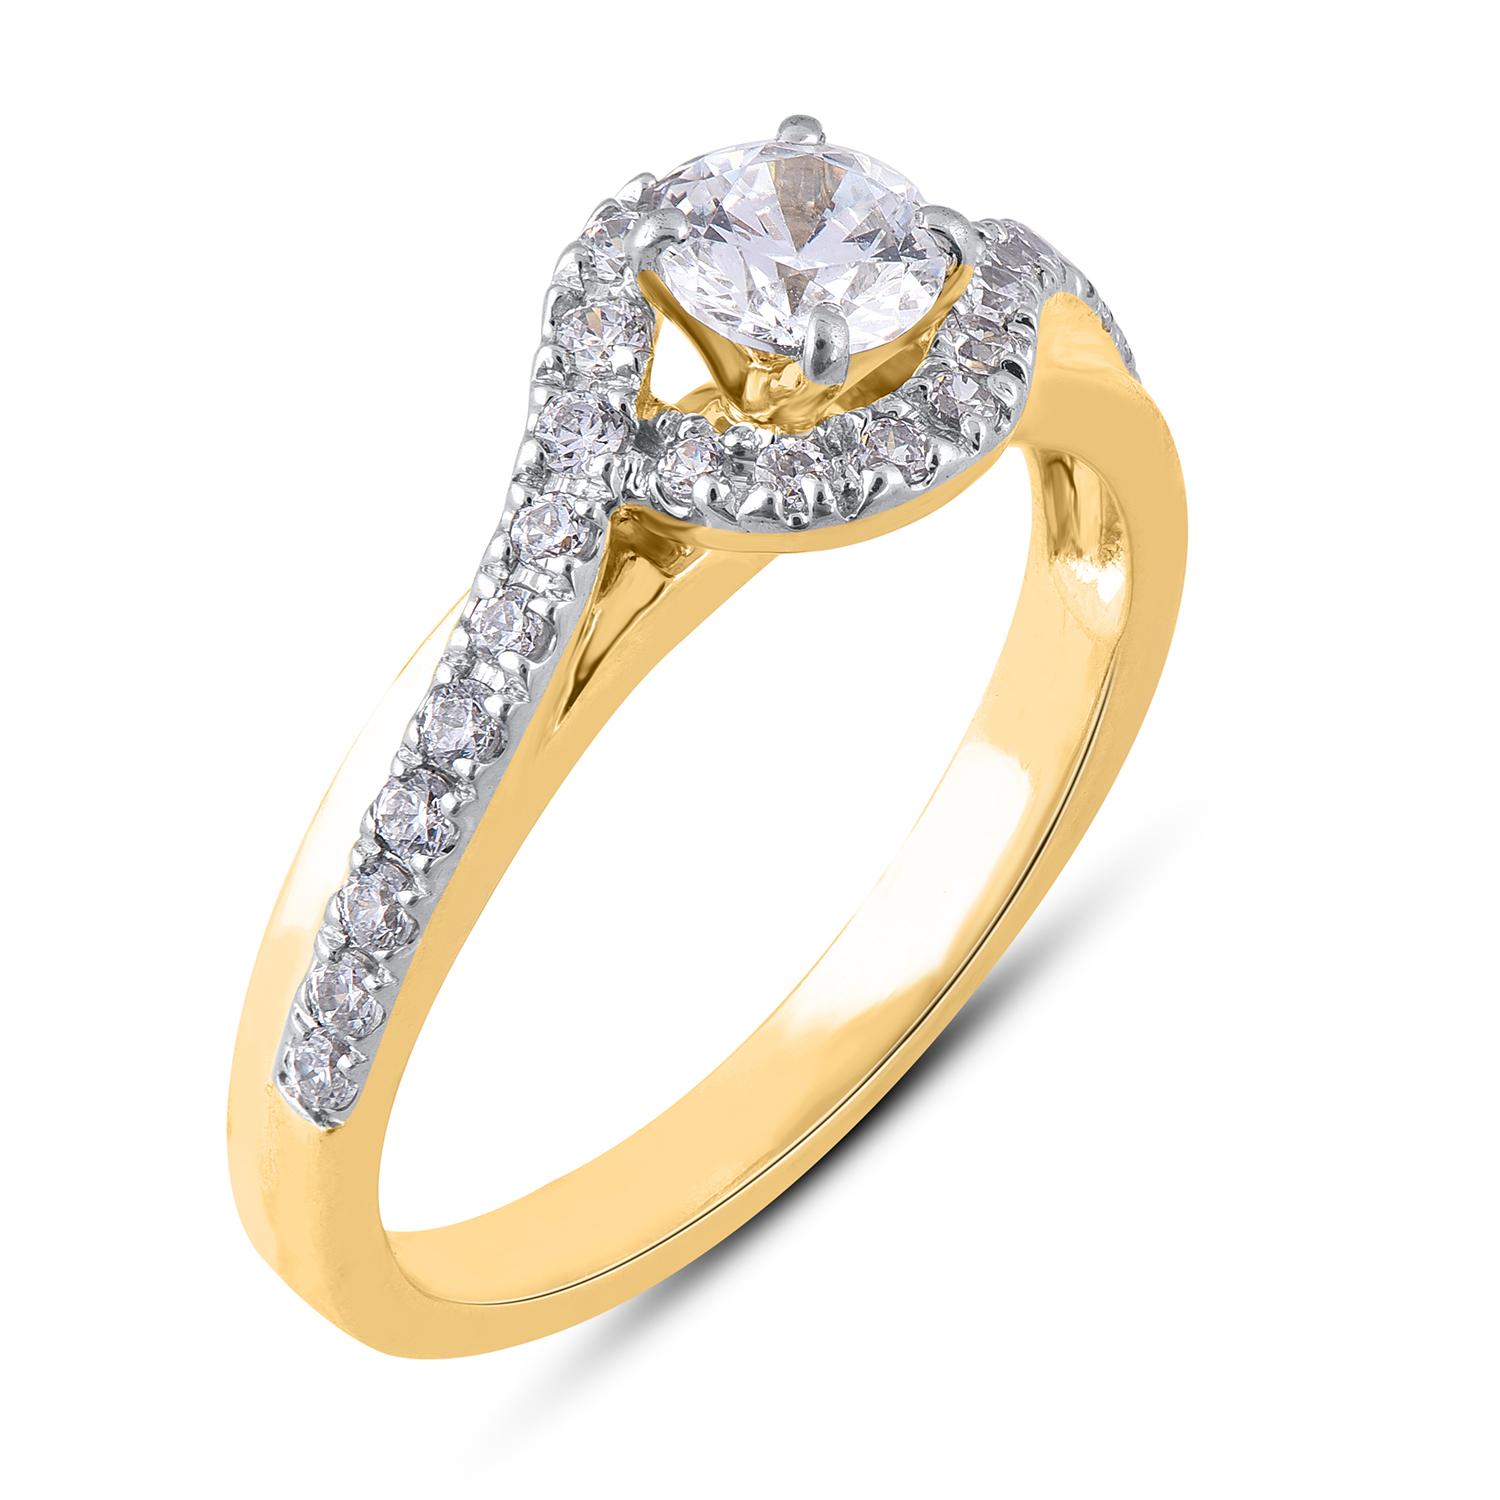 The curvy shank style of this ring is borrowed from our bestselling Silhouette Collection of Engagement Ring is expertly crafted in 18 Yellow Gold and features 0.40ct centre stone and 0.35 ct of diamond frame and shank with prong setting. The